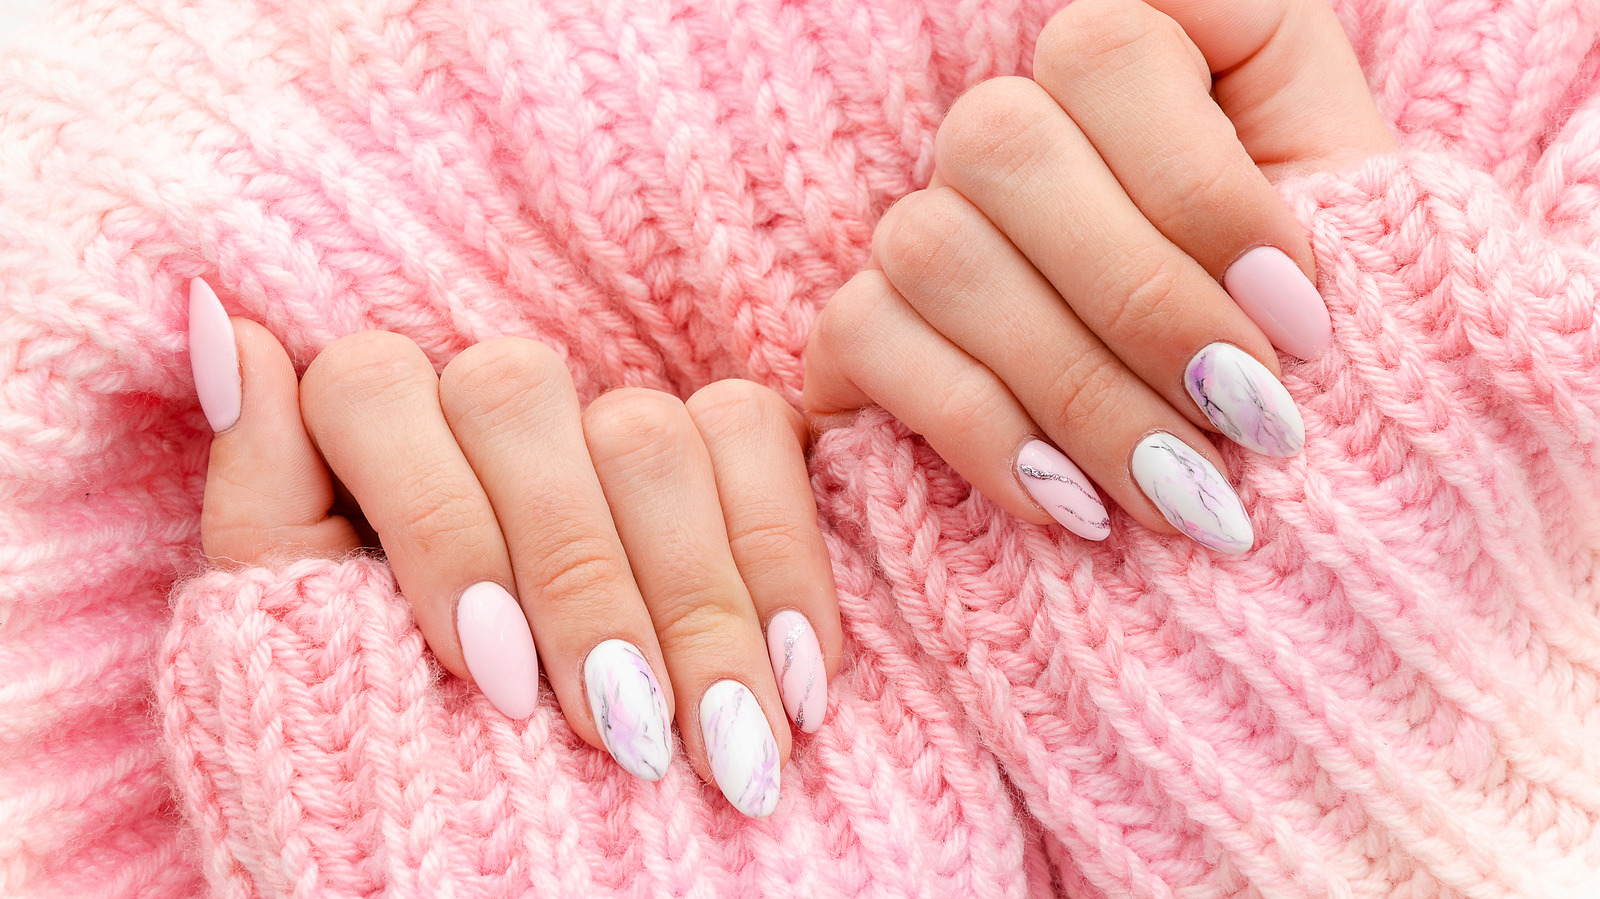 This Is How You Should Be Cleaning Underneath Your Fingernails